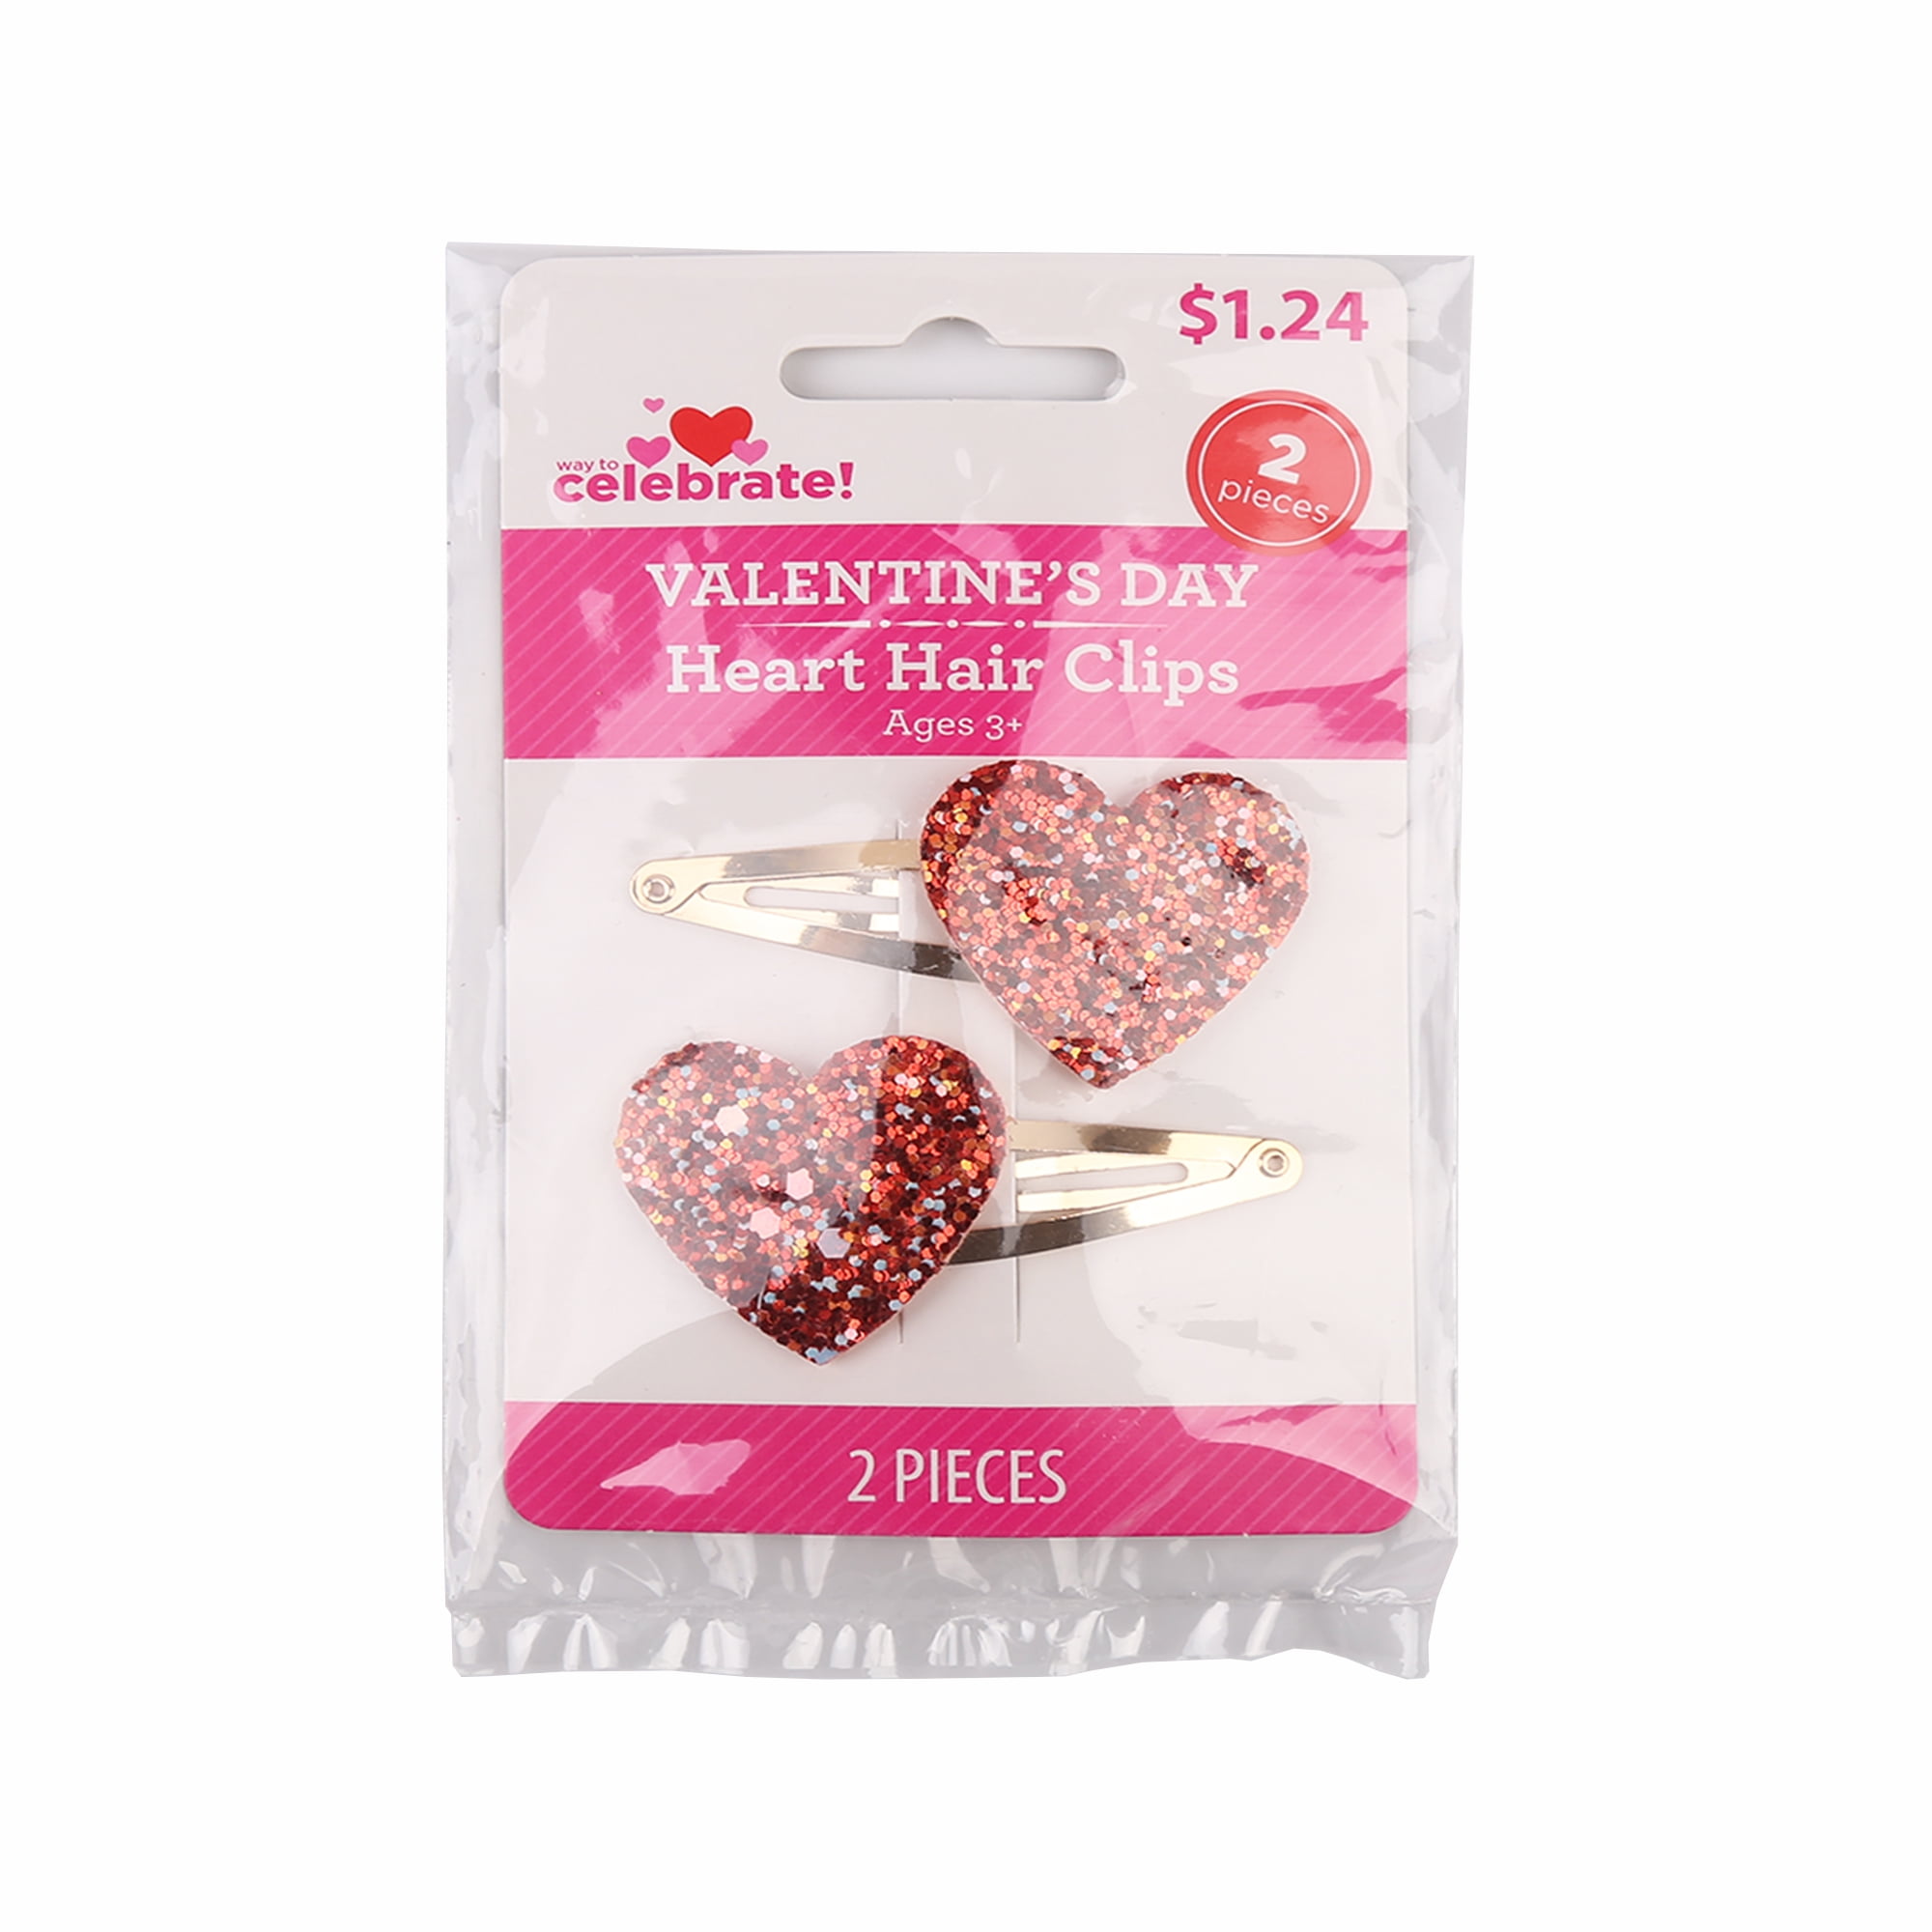 WAY TO CELEBRATE! Way To Celebrate Heart Hair Clips, Red, Metal, Clips